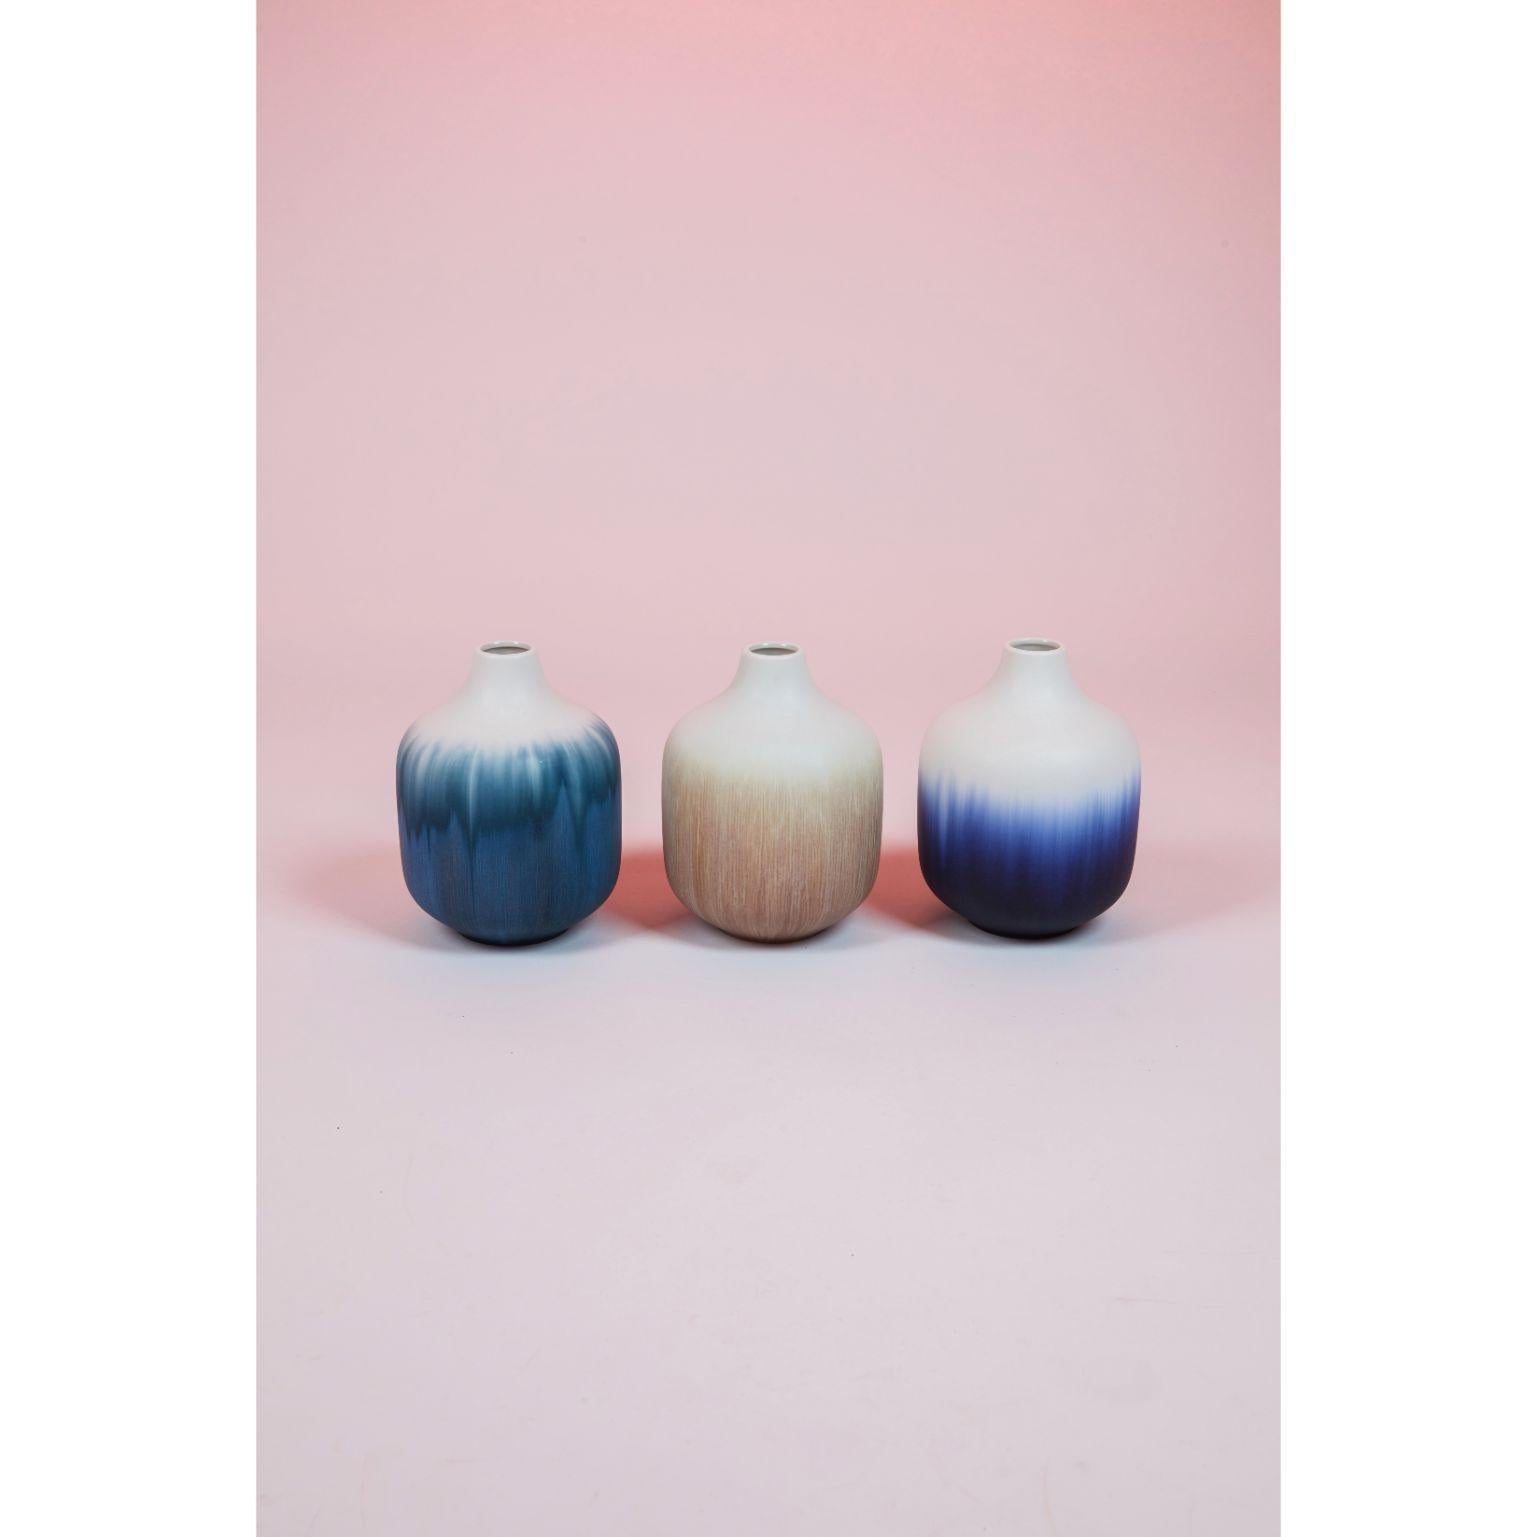 A Set of 3 element vases - Short by Milan Pekar
Dimensions: D16 x H21 cm
Materials: Glaze, porcelain

Hand-crafted in the Czech Republic. 

Also available: different colors and patterns

Established own studio August 2009 – Focus mainly on